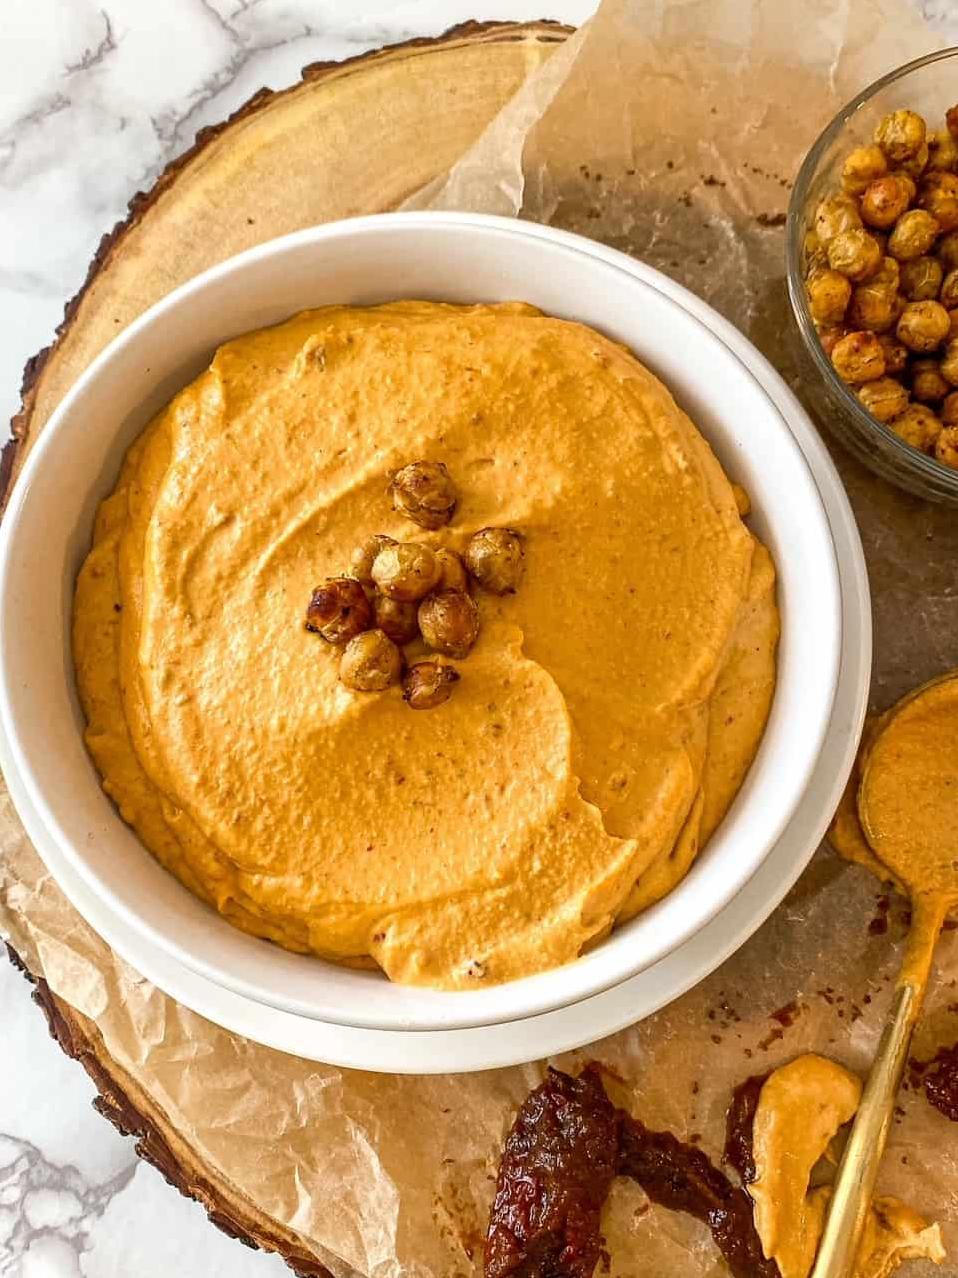  Get ready to enjoy a smoky and spicy chipotle hummus!